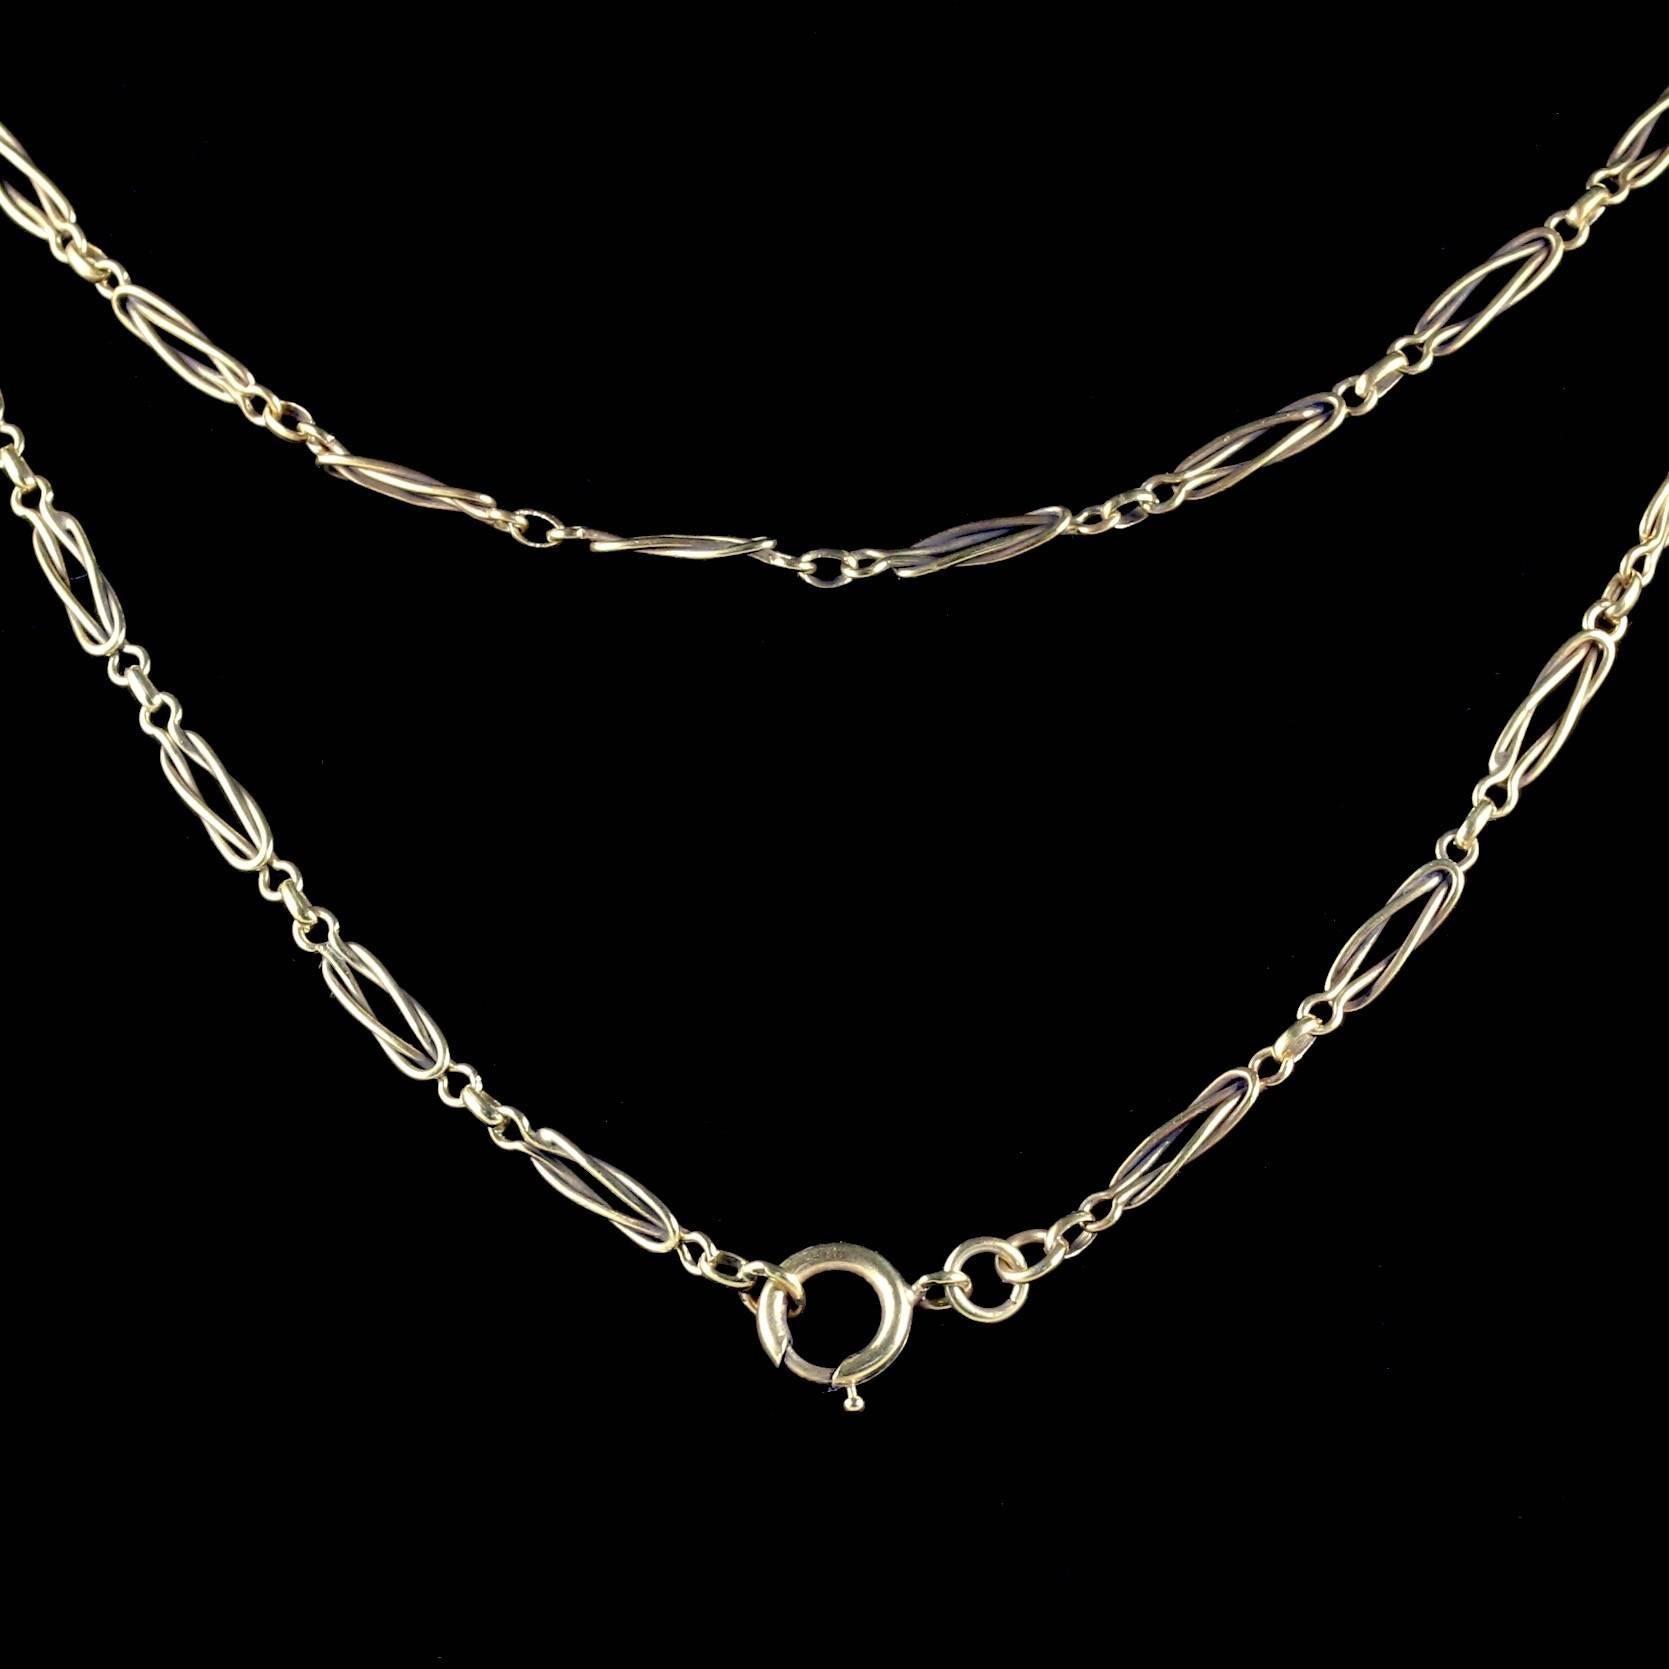 This beautiful Victorian fancy French guard chain is set in 18ct Yellow Gold on Silver, Circa 1900.

Each link boasts Victorian workmanship all round.

It is steeped in history from it’s era.

The chain is a wonderful piece which looks beautiful